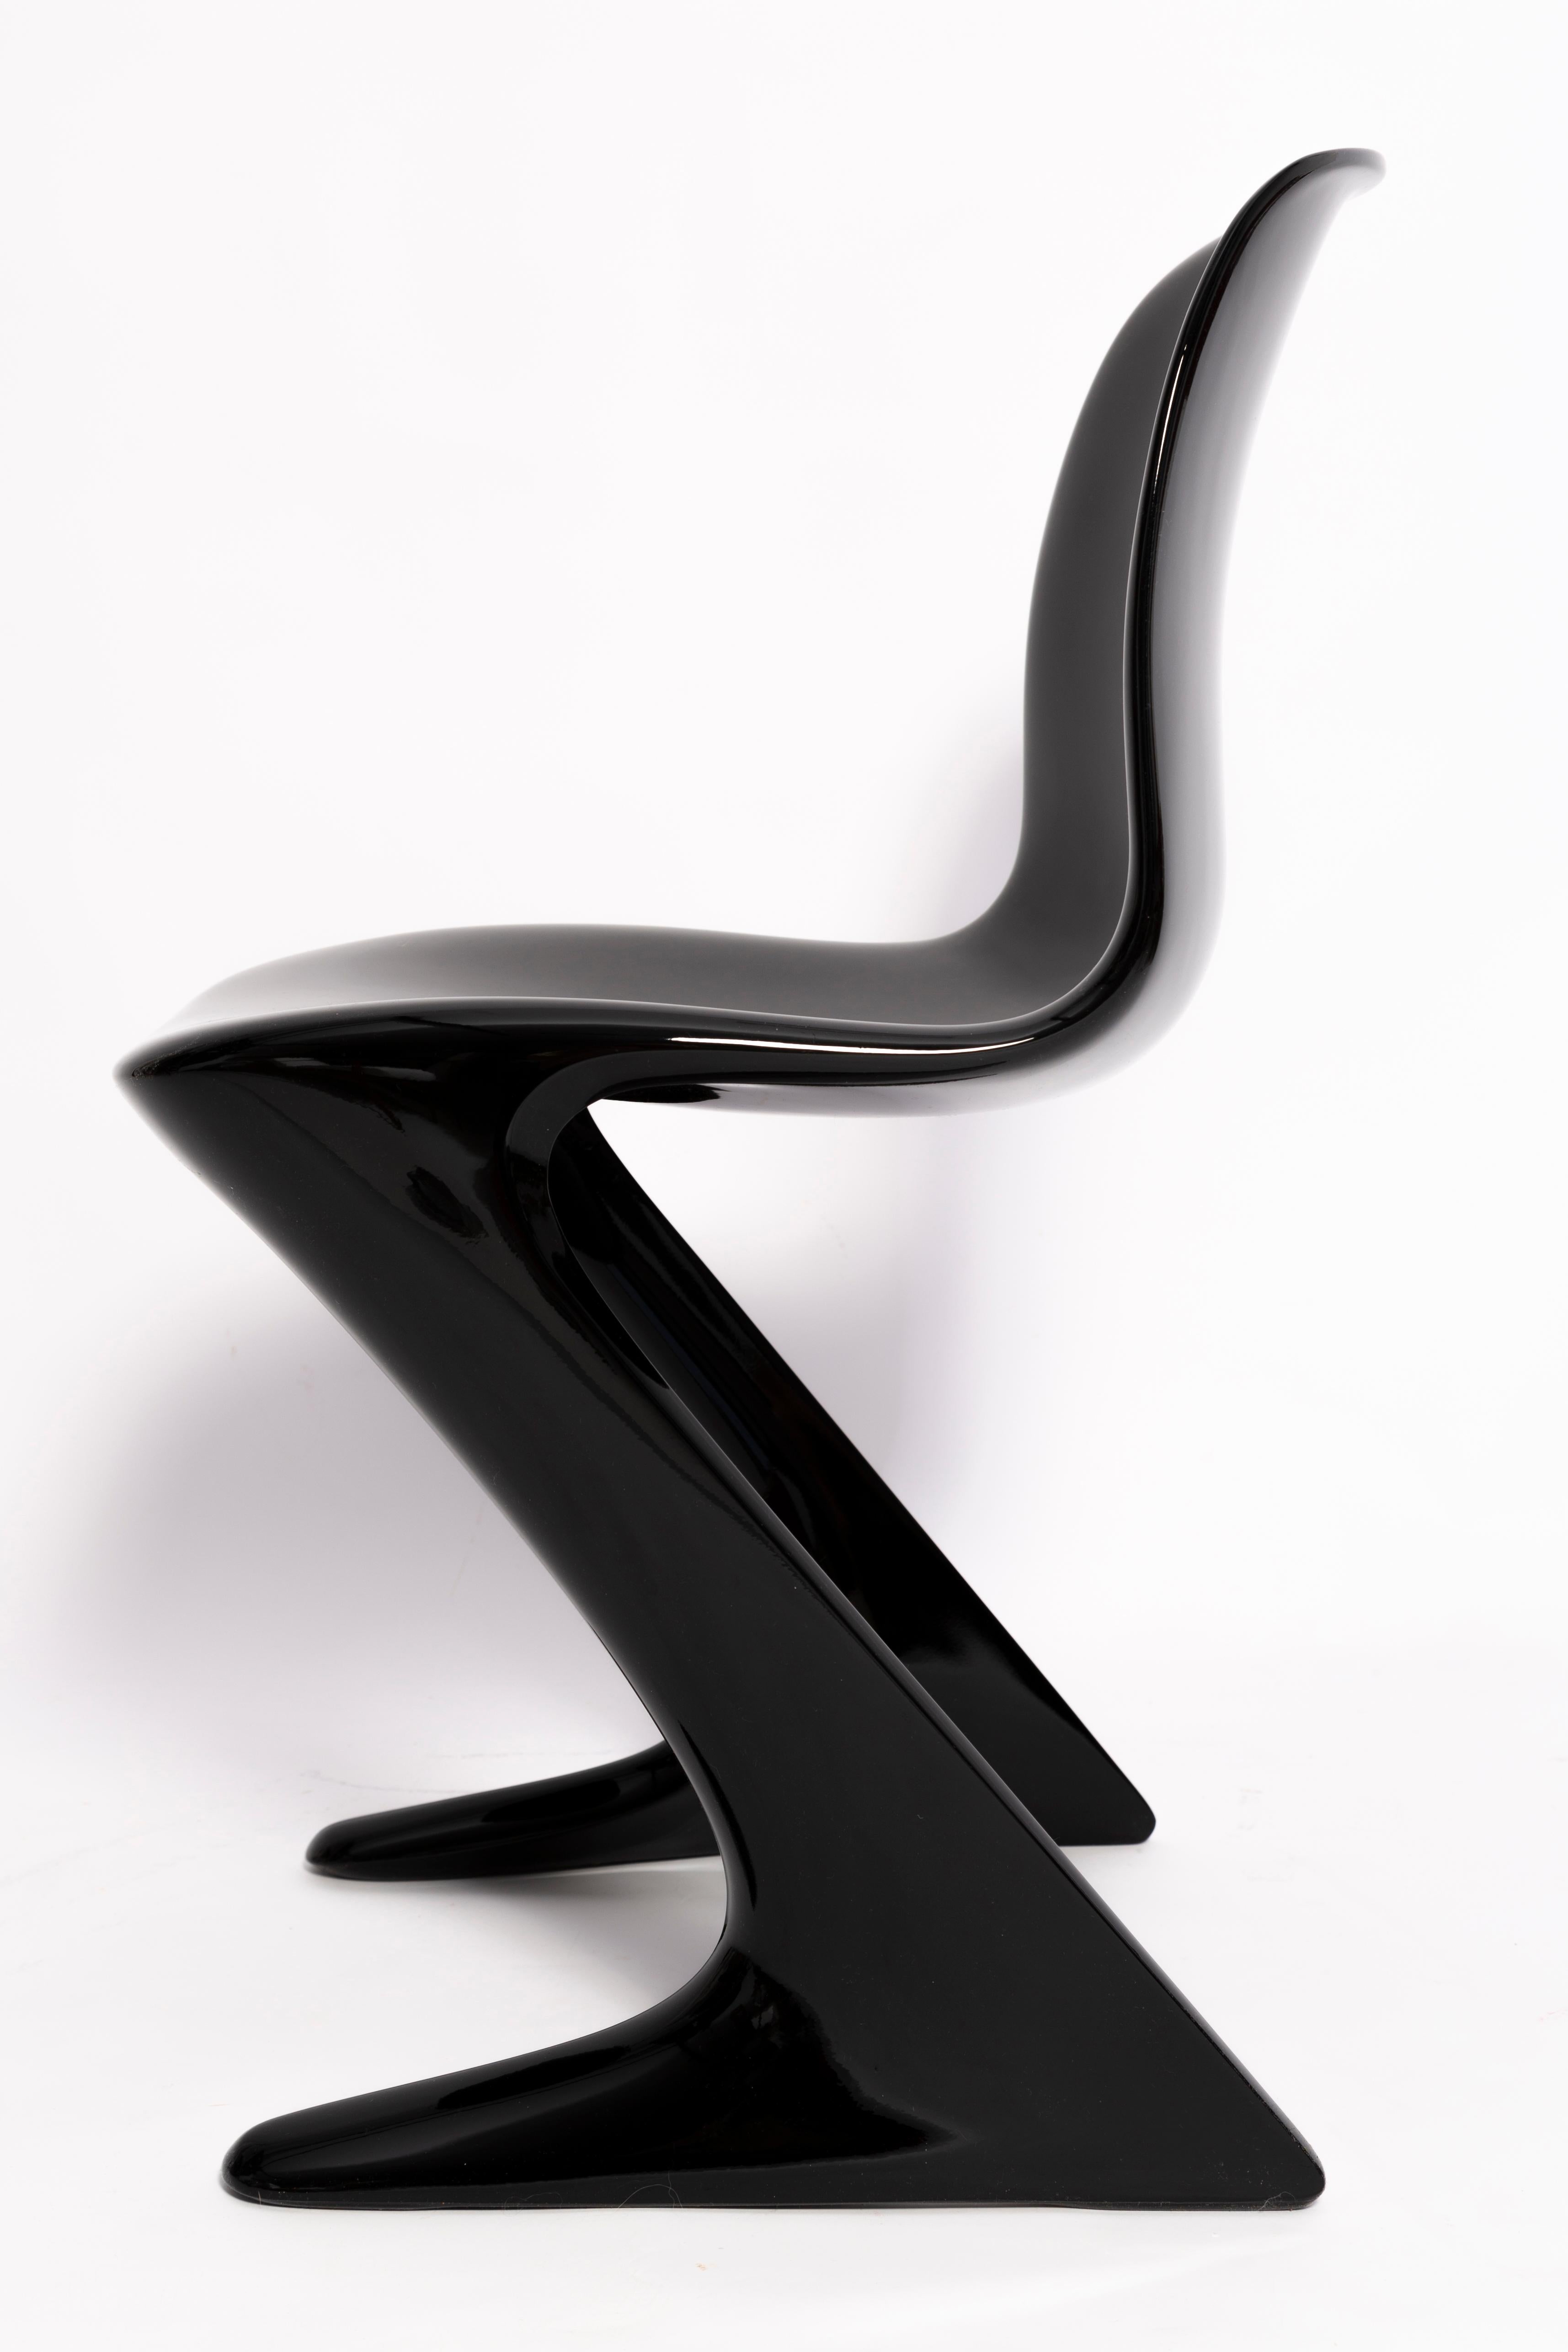 Fiberglass Four Mid Century Black Kangaroo Chairs Designed by Ernst Moeckl, Germany, 1960s For Sale